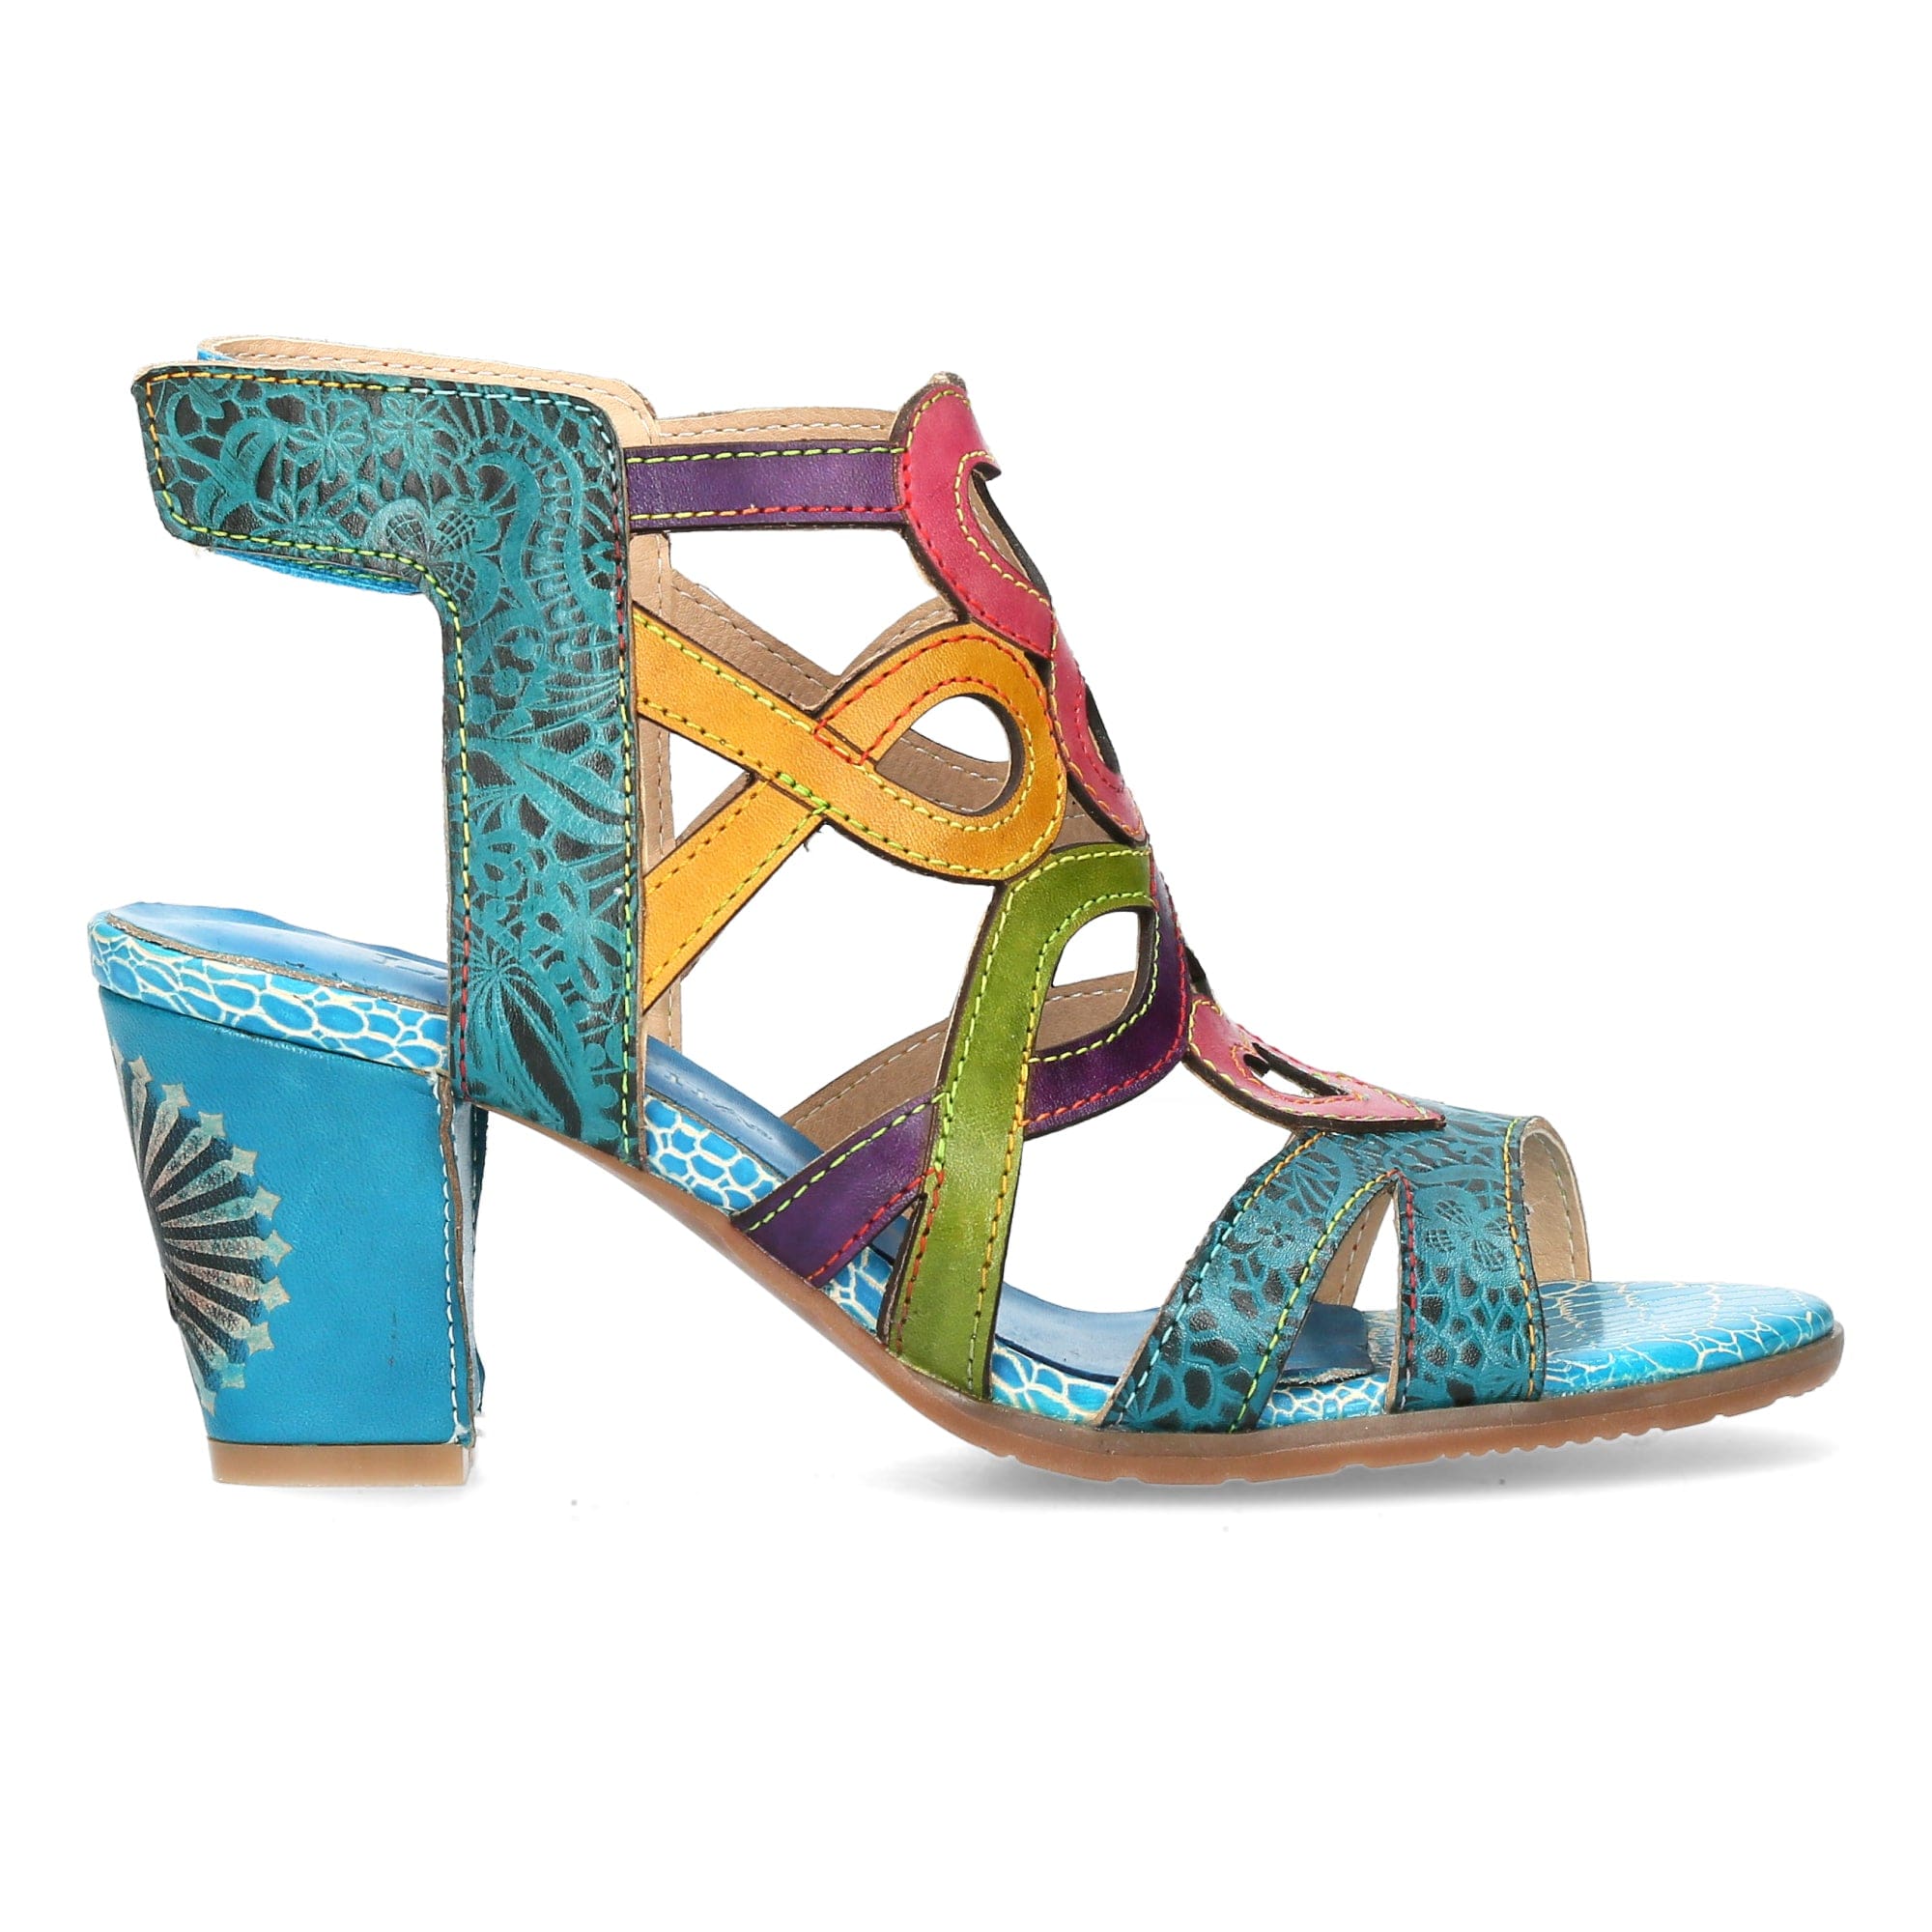 Chaussures HUCTO 07 - 35 / Turquoise - Sandale